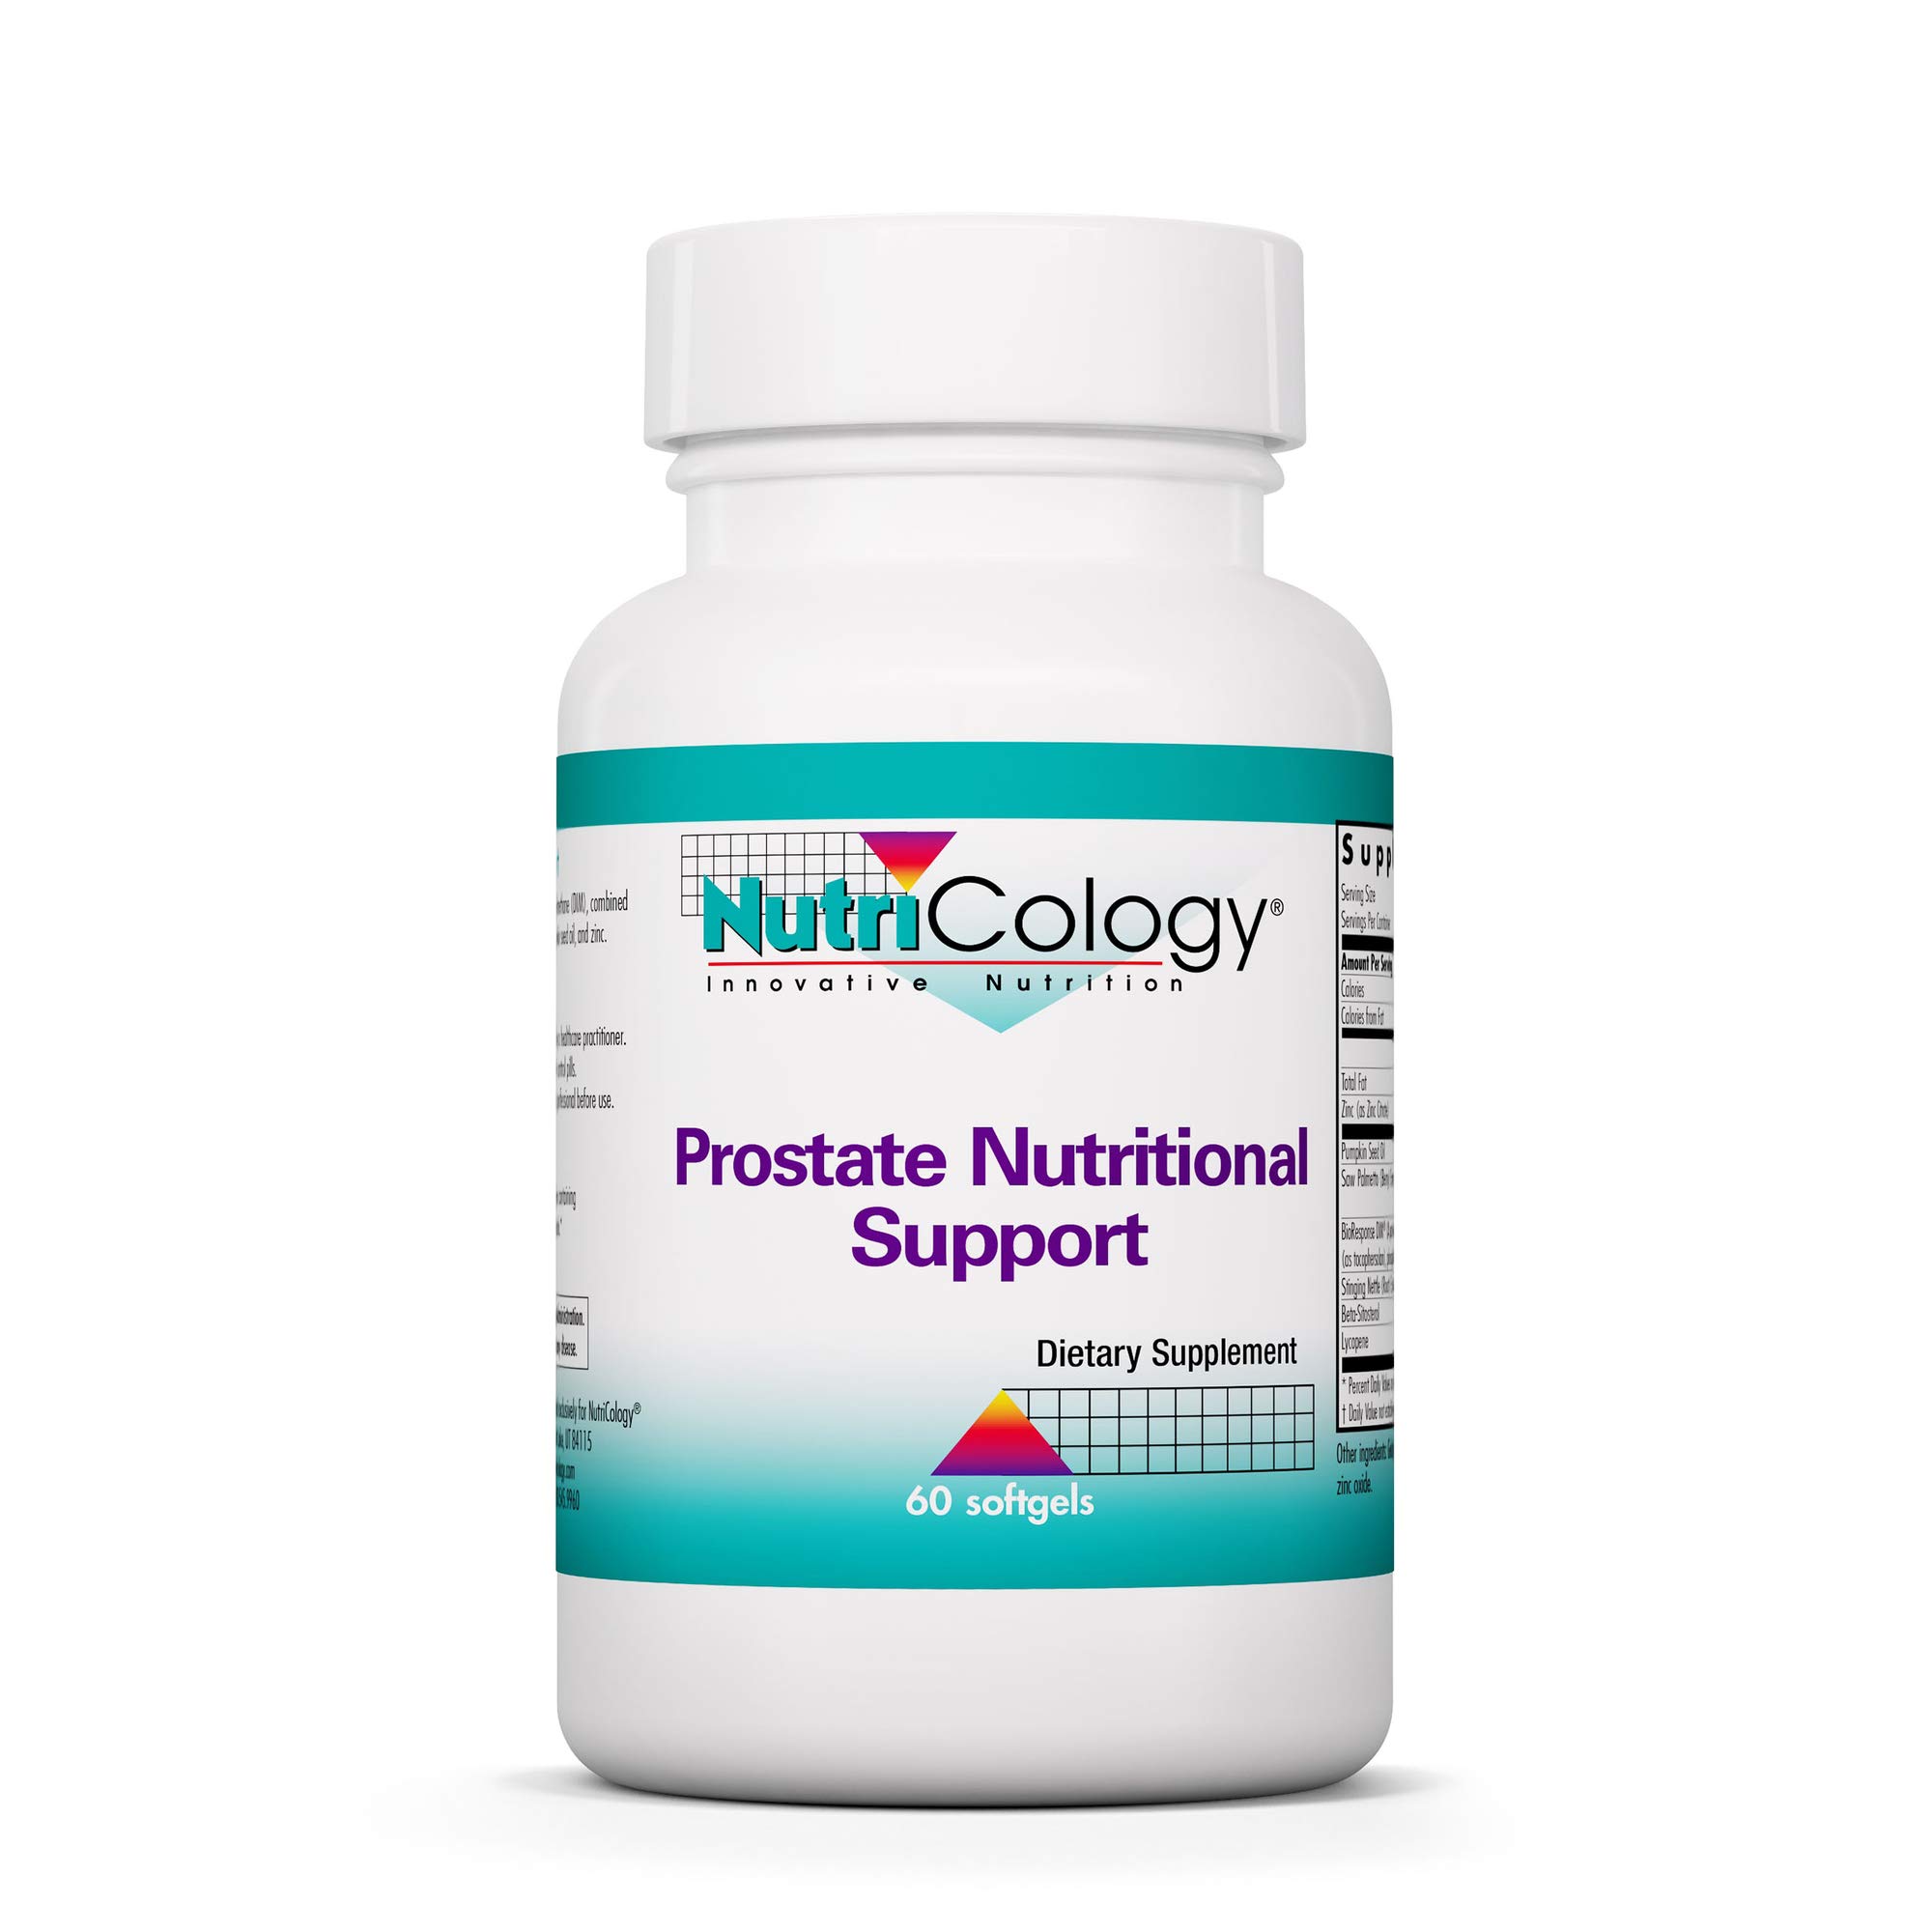 NutriCology Prostate Nutritional Support - DIM, Zinc, Pumpkin Seed, Saw Palmetto - 60 Softgels